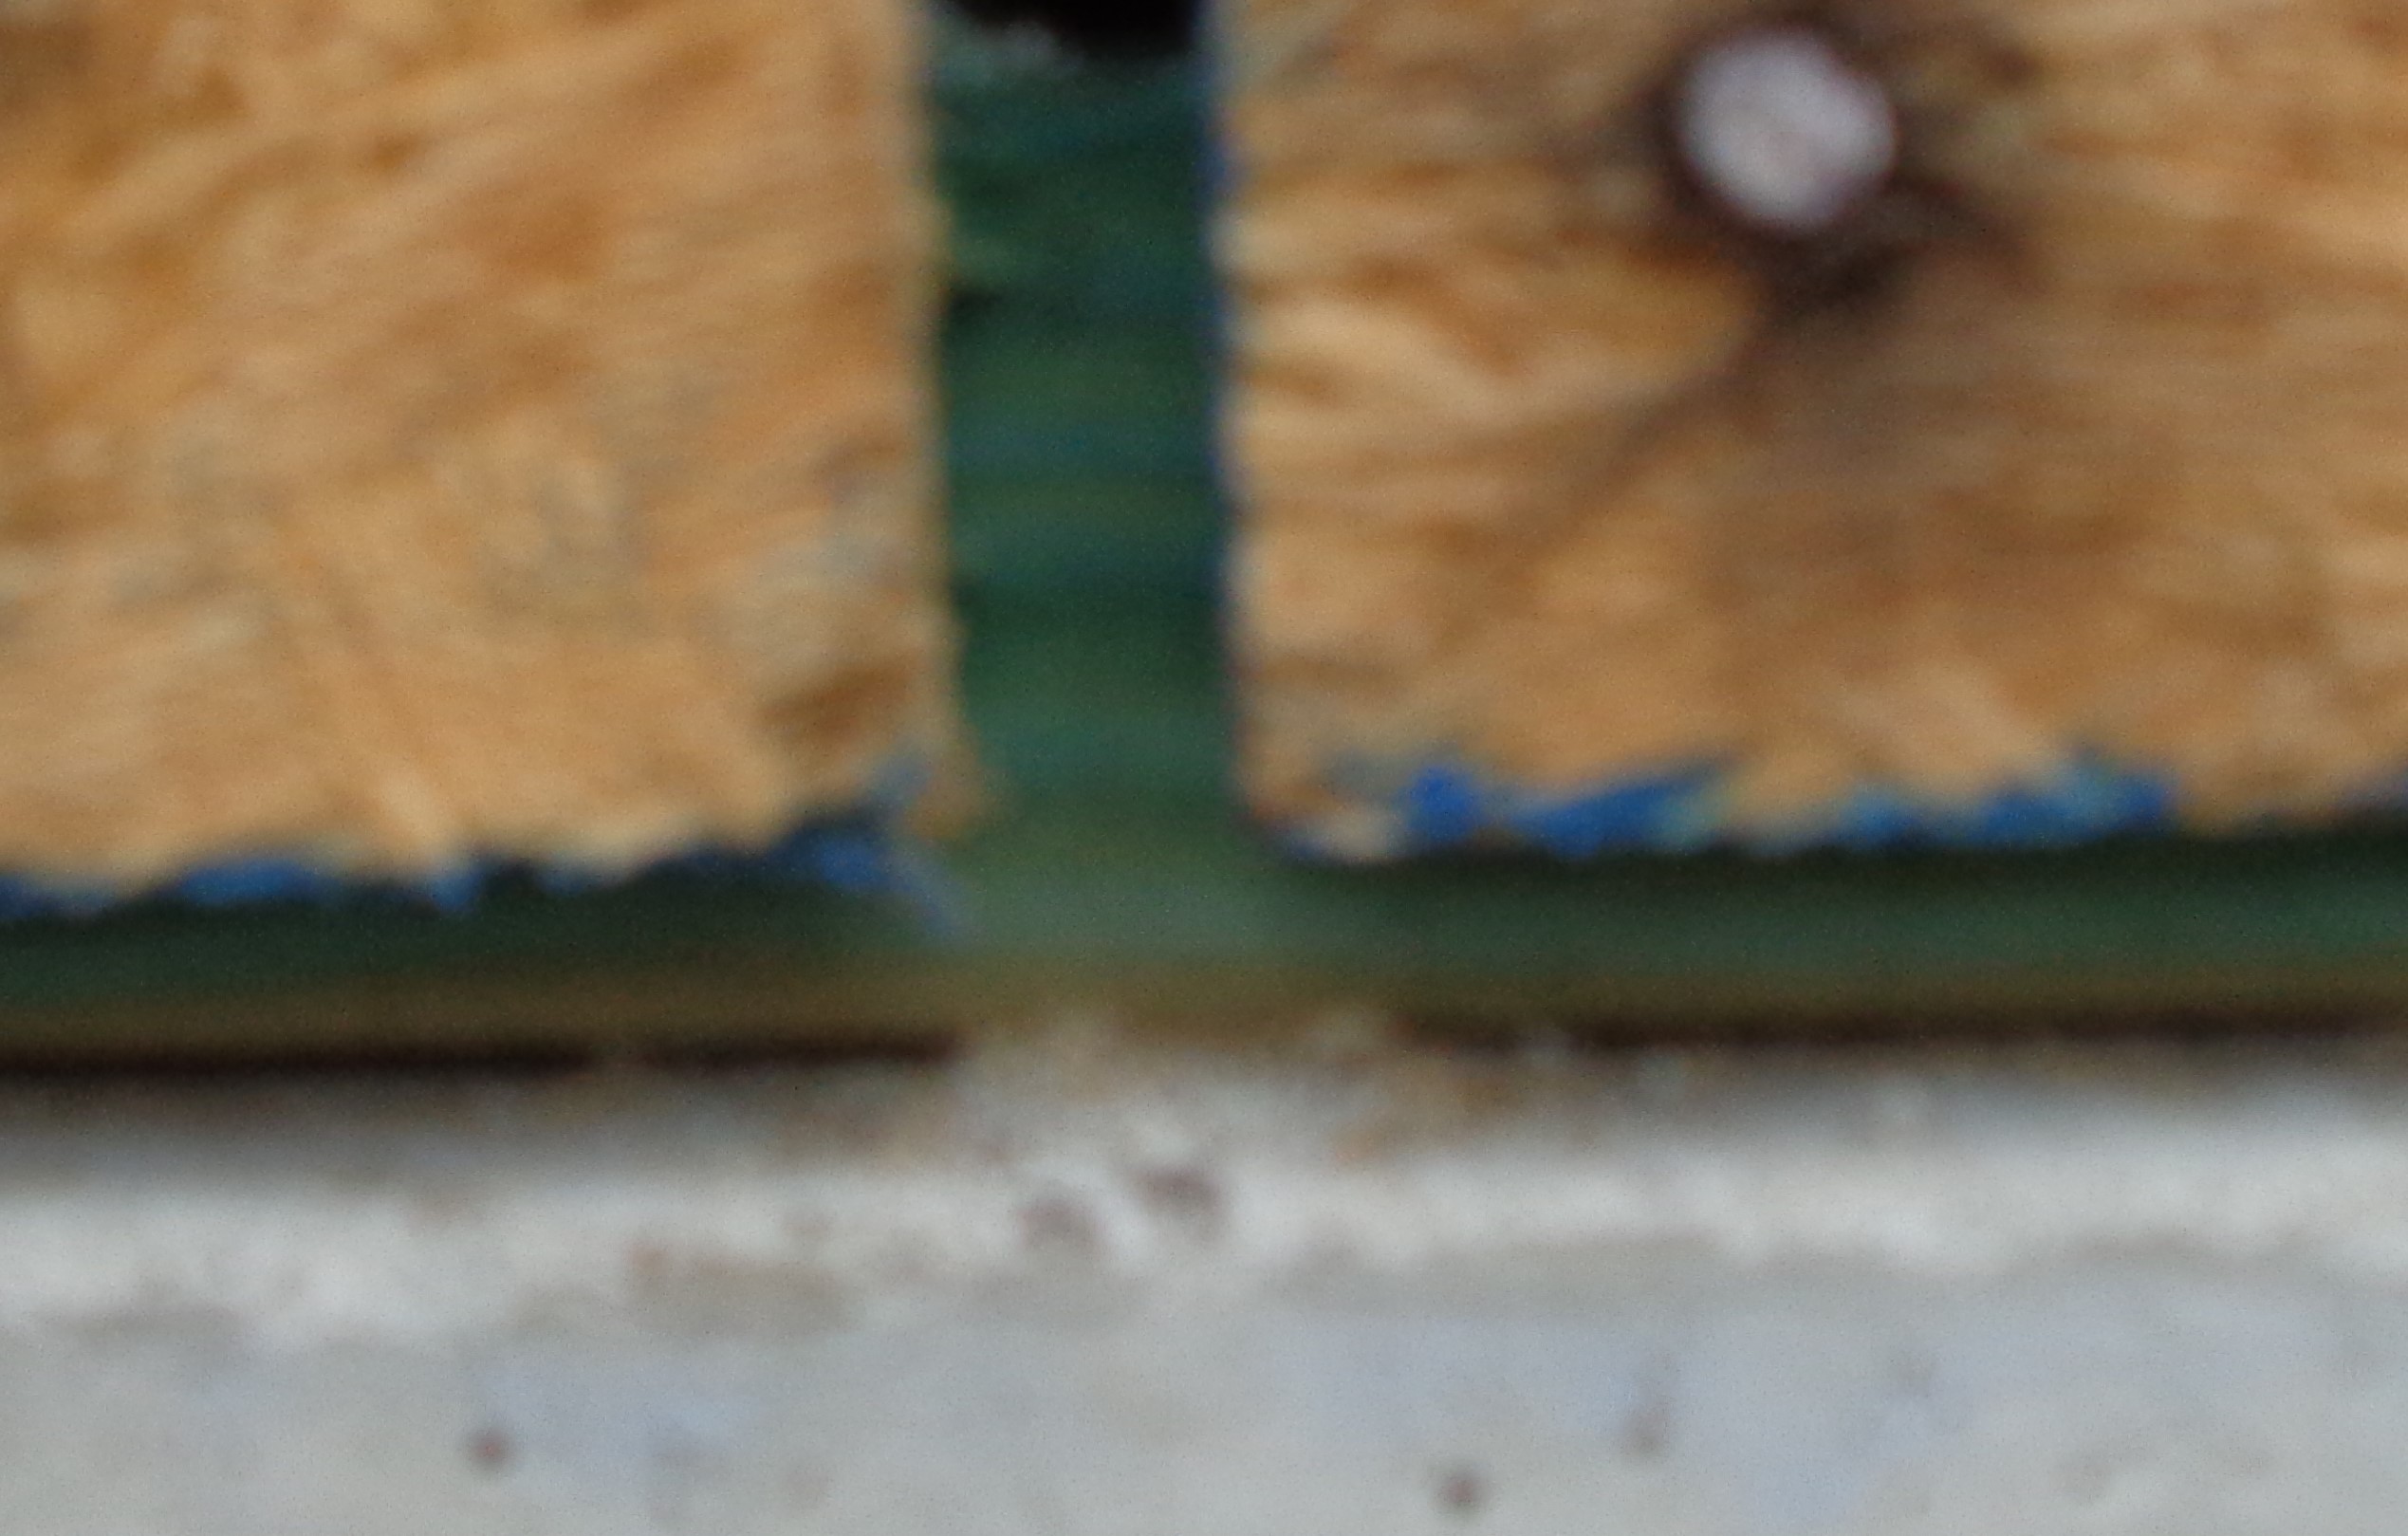 Poor sheathing installation with gaps between sheets and exposed mudsill.